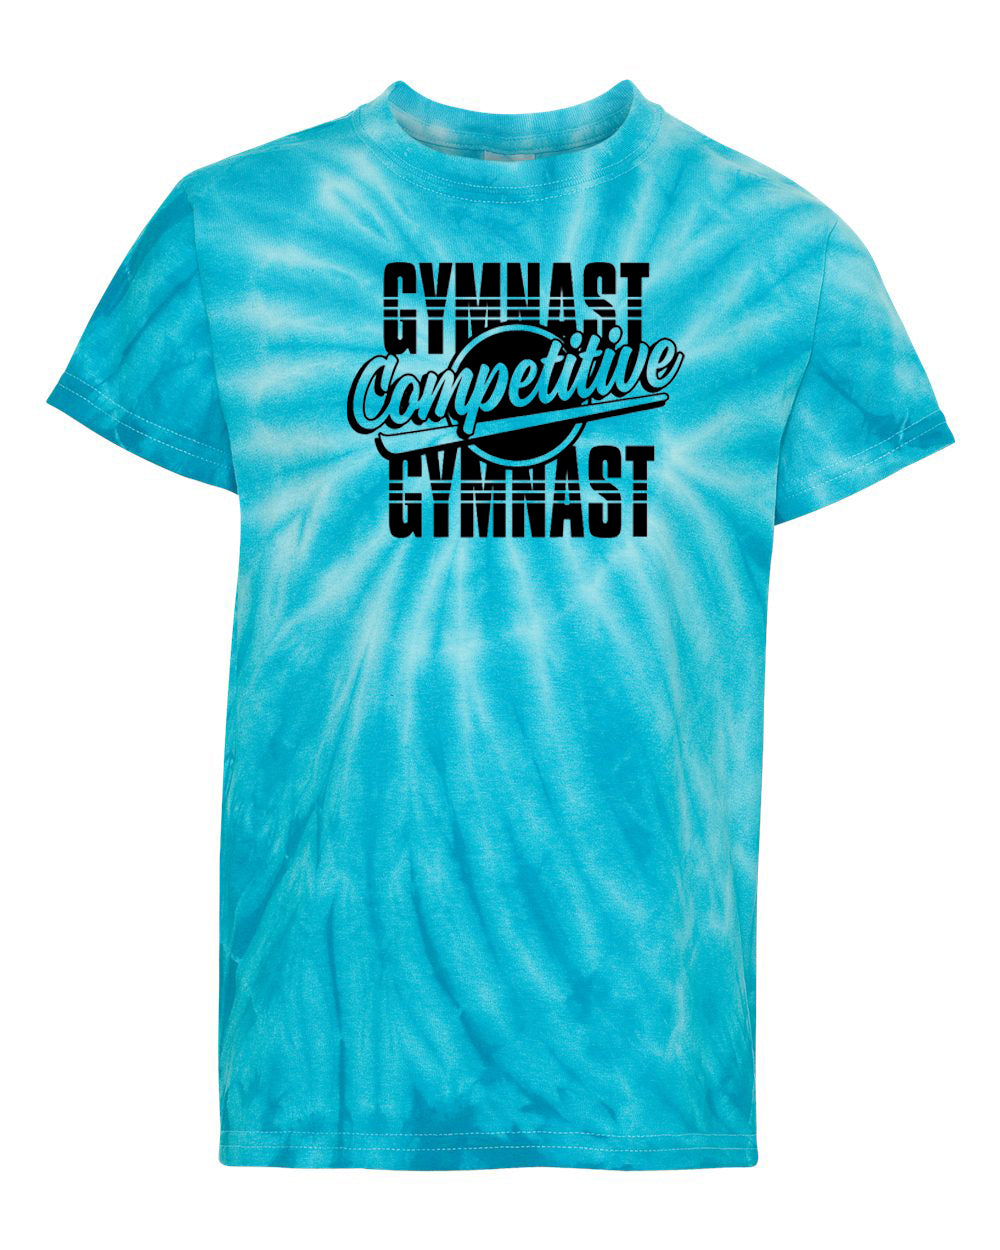 Competitive Gymnast Adult Tie Dye T-Shirt